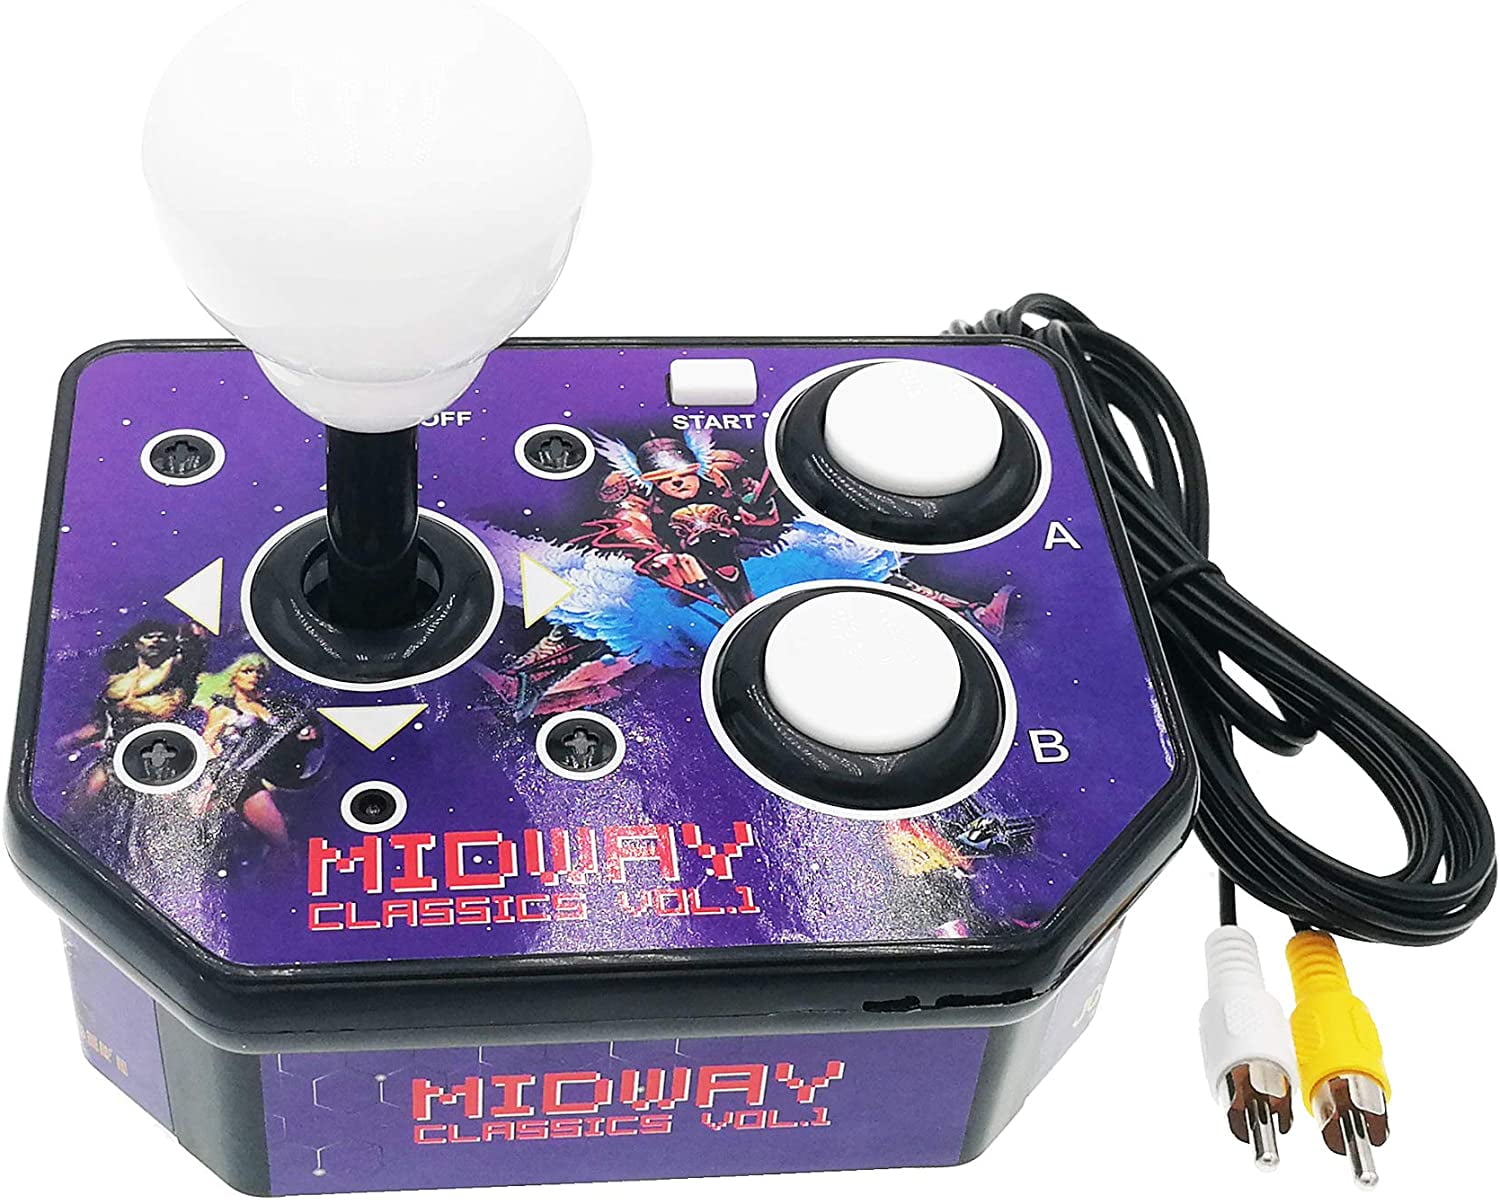 Midway Plug N Play Classic Arcade MSI Ent TV Video Game,Defender,Gauntlet,Joust 